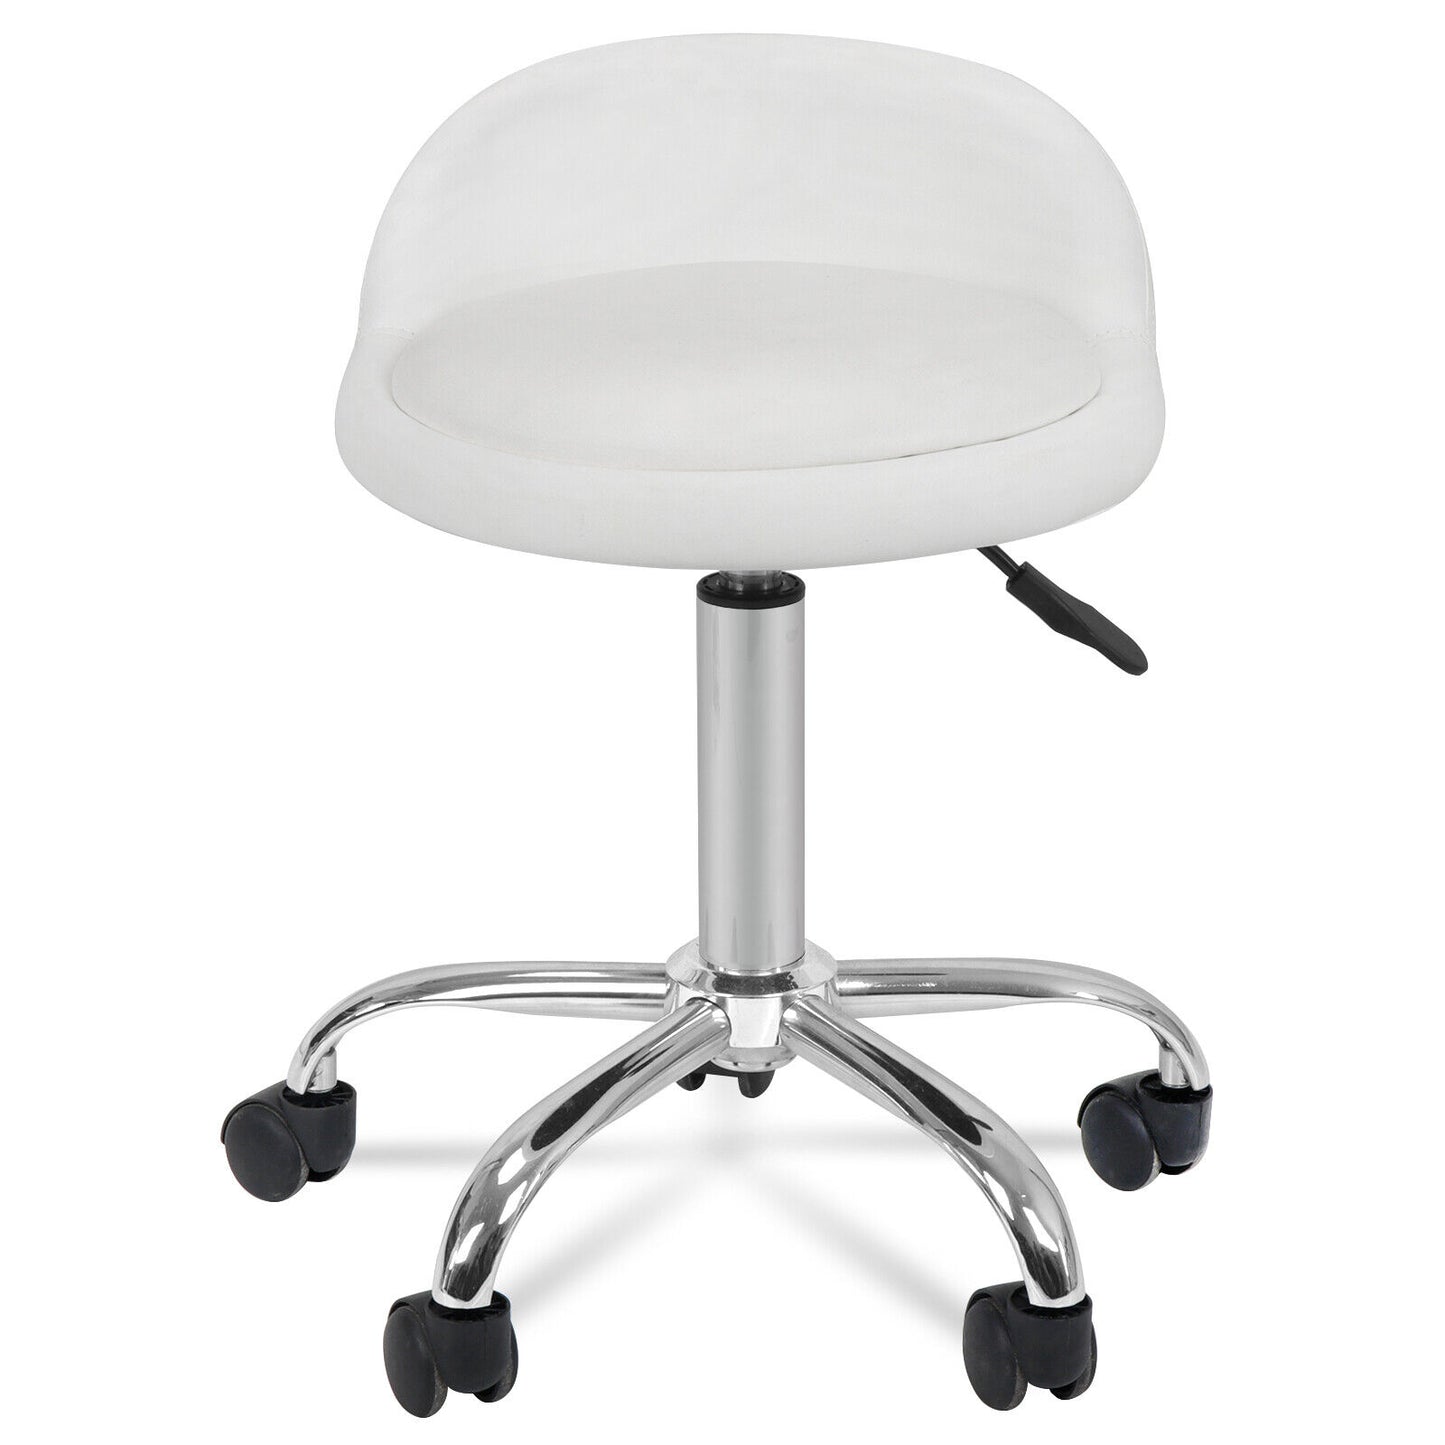 Adjustable Height Hydraulic Rolling Swivel Stool Spa Salon Chair with Back Rest